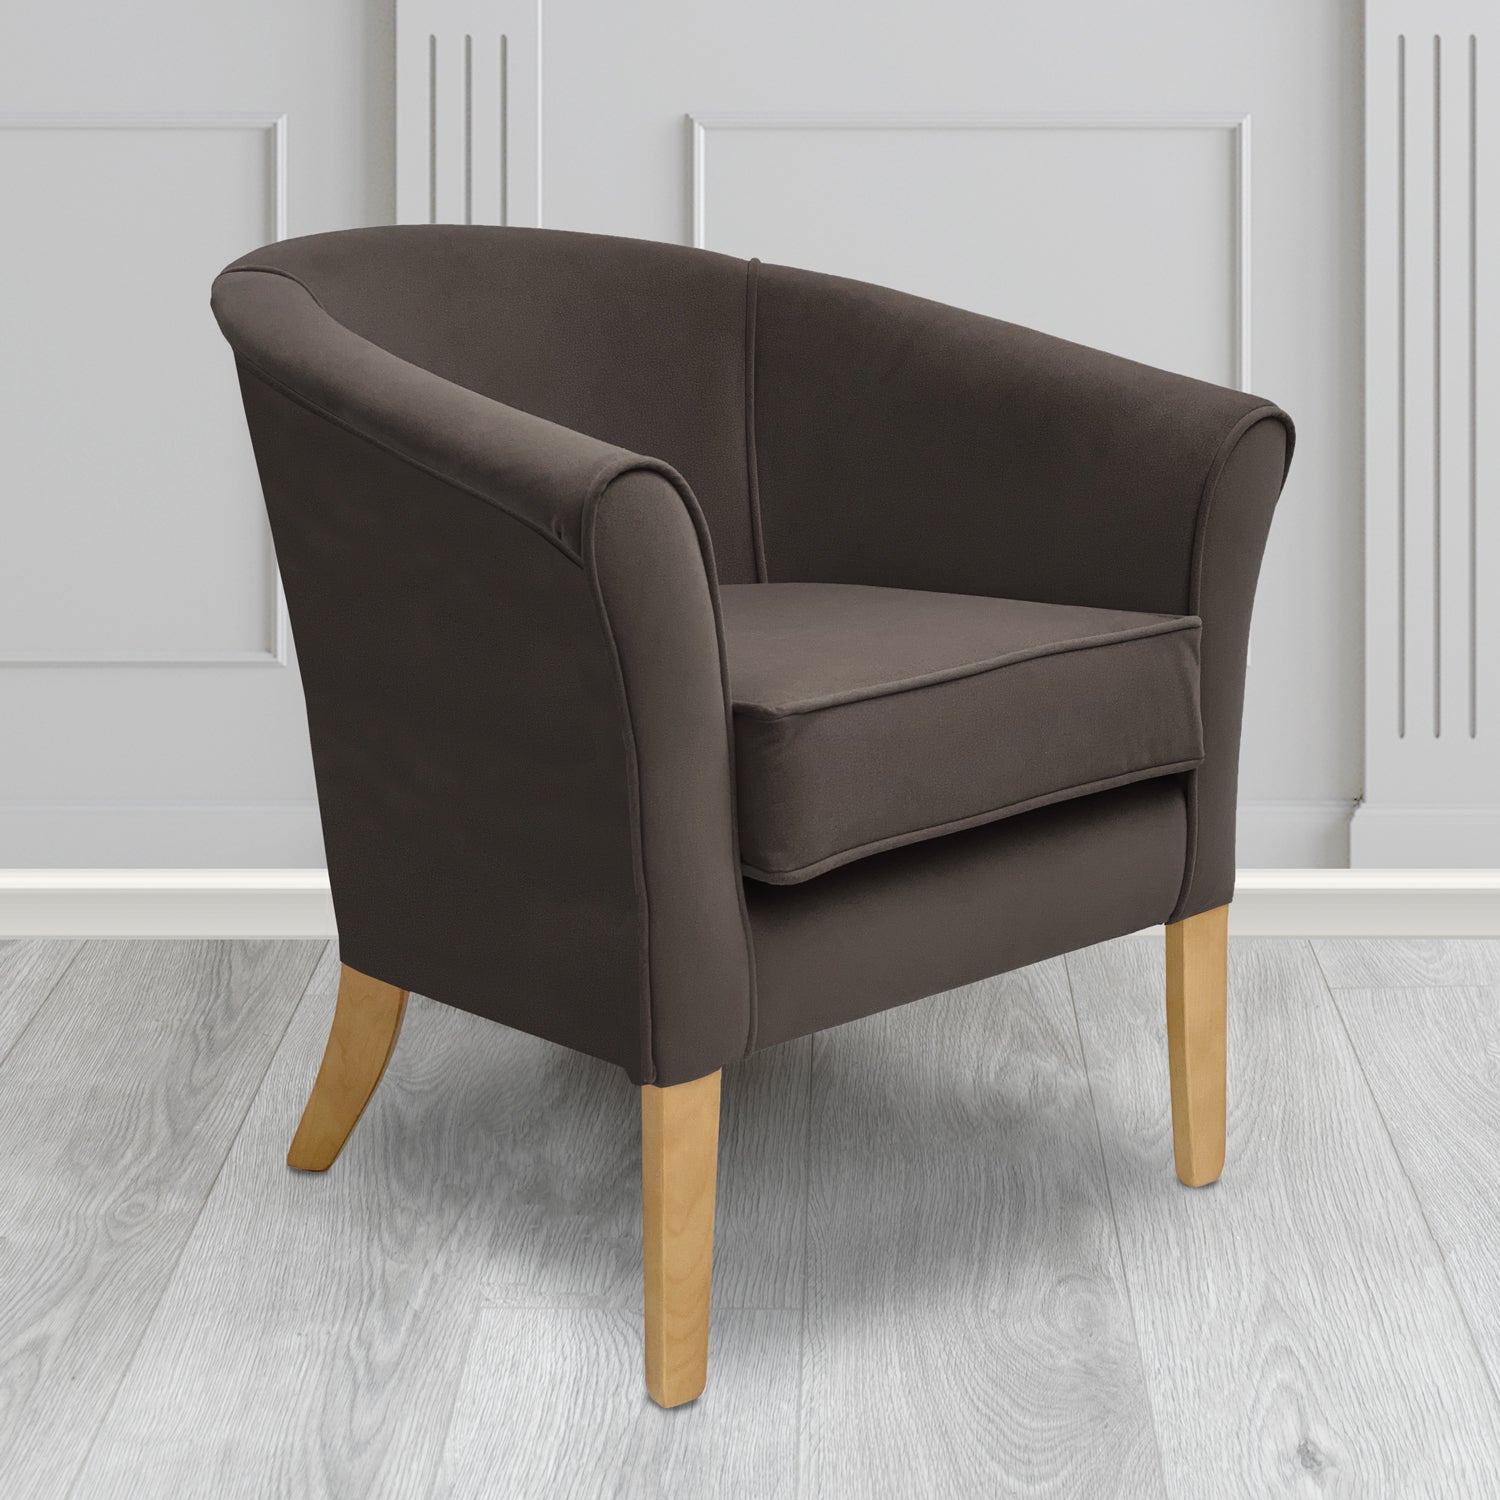 Aspen Tub Chair in Noble 903 Charcoal Crib 5 Velvet Fabric - Water Resistant - The Tub Chair Shop